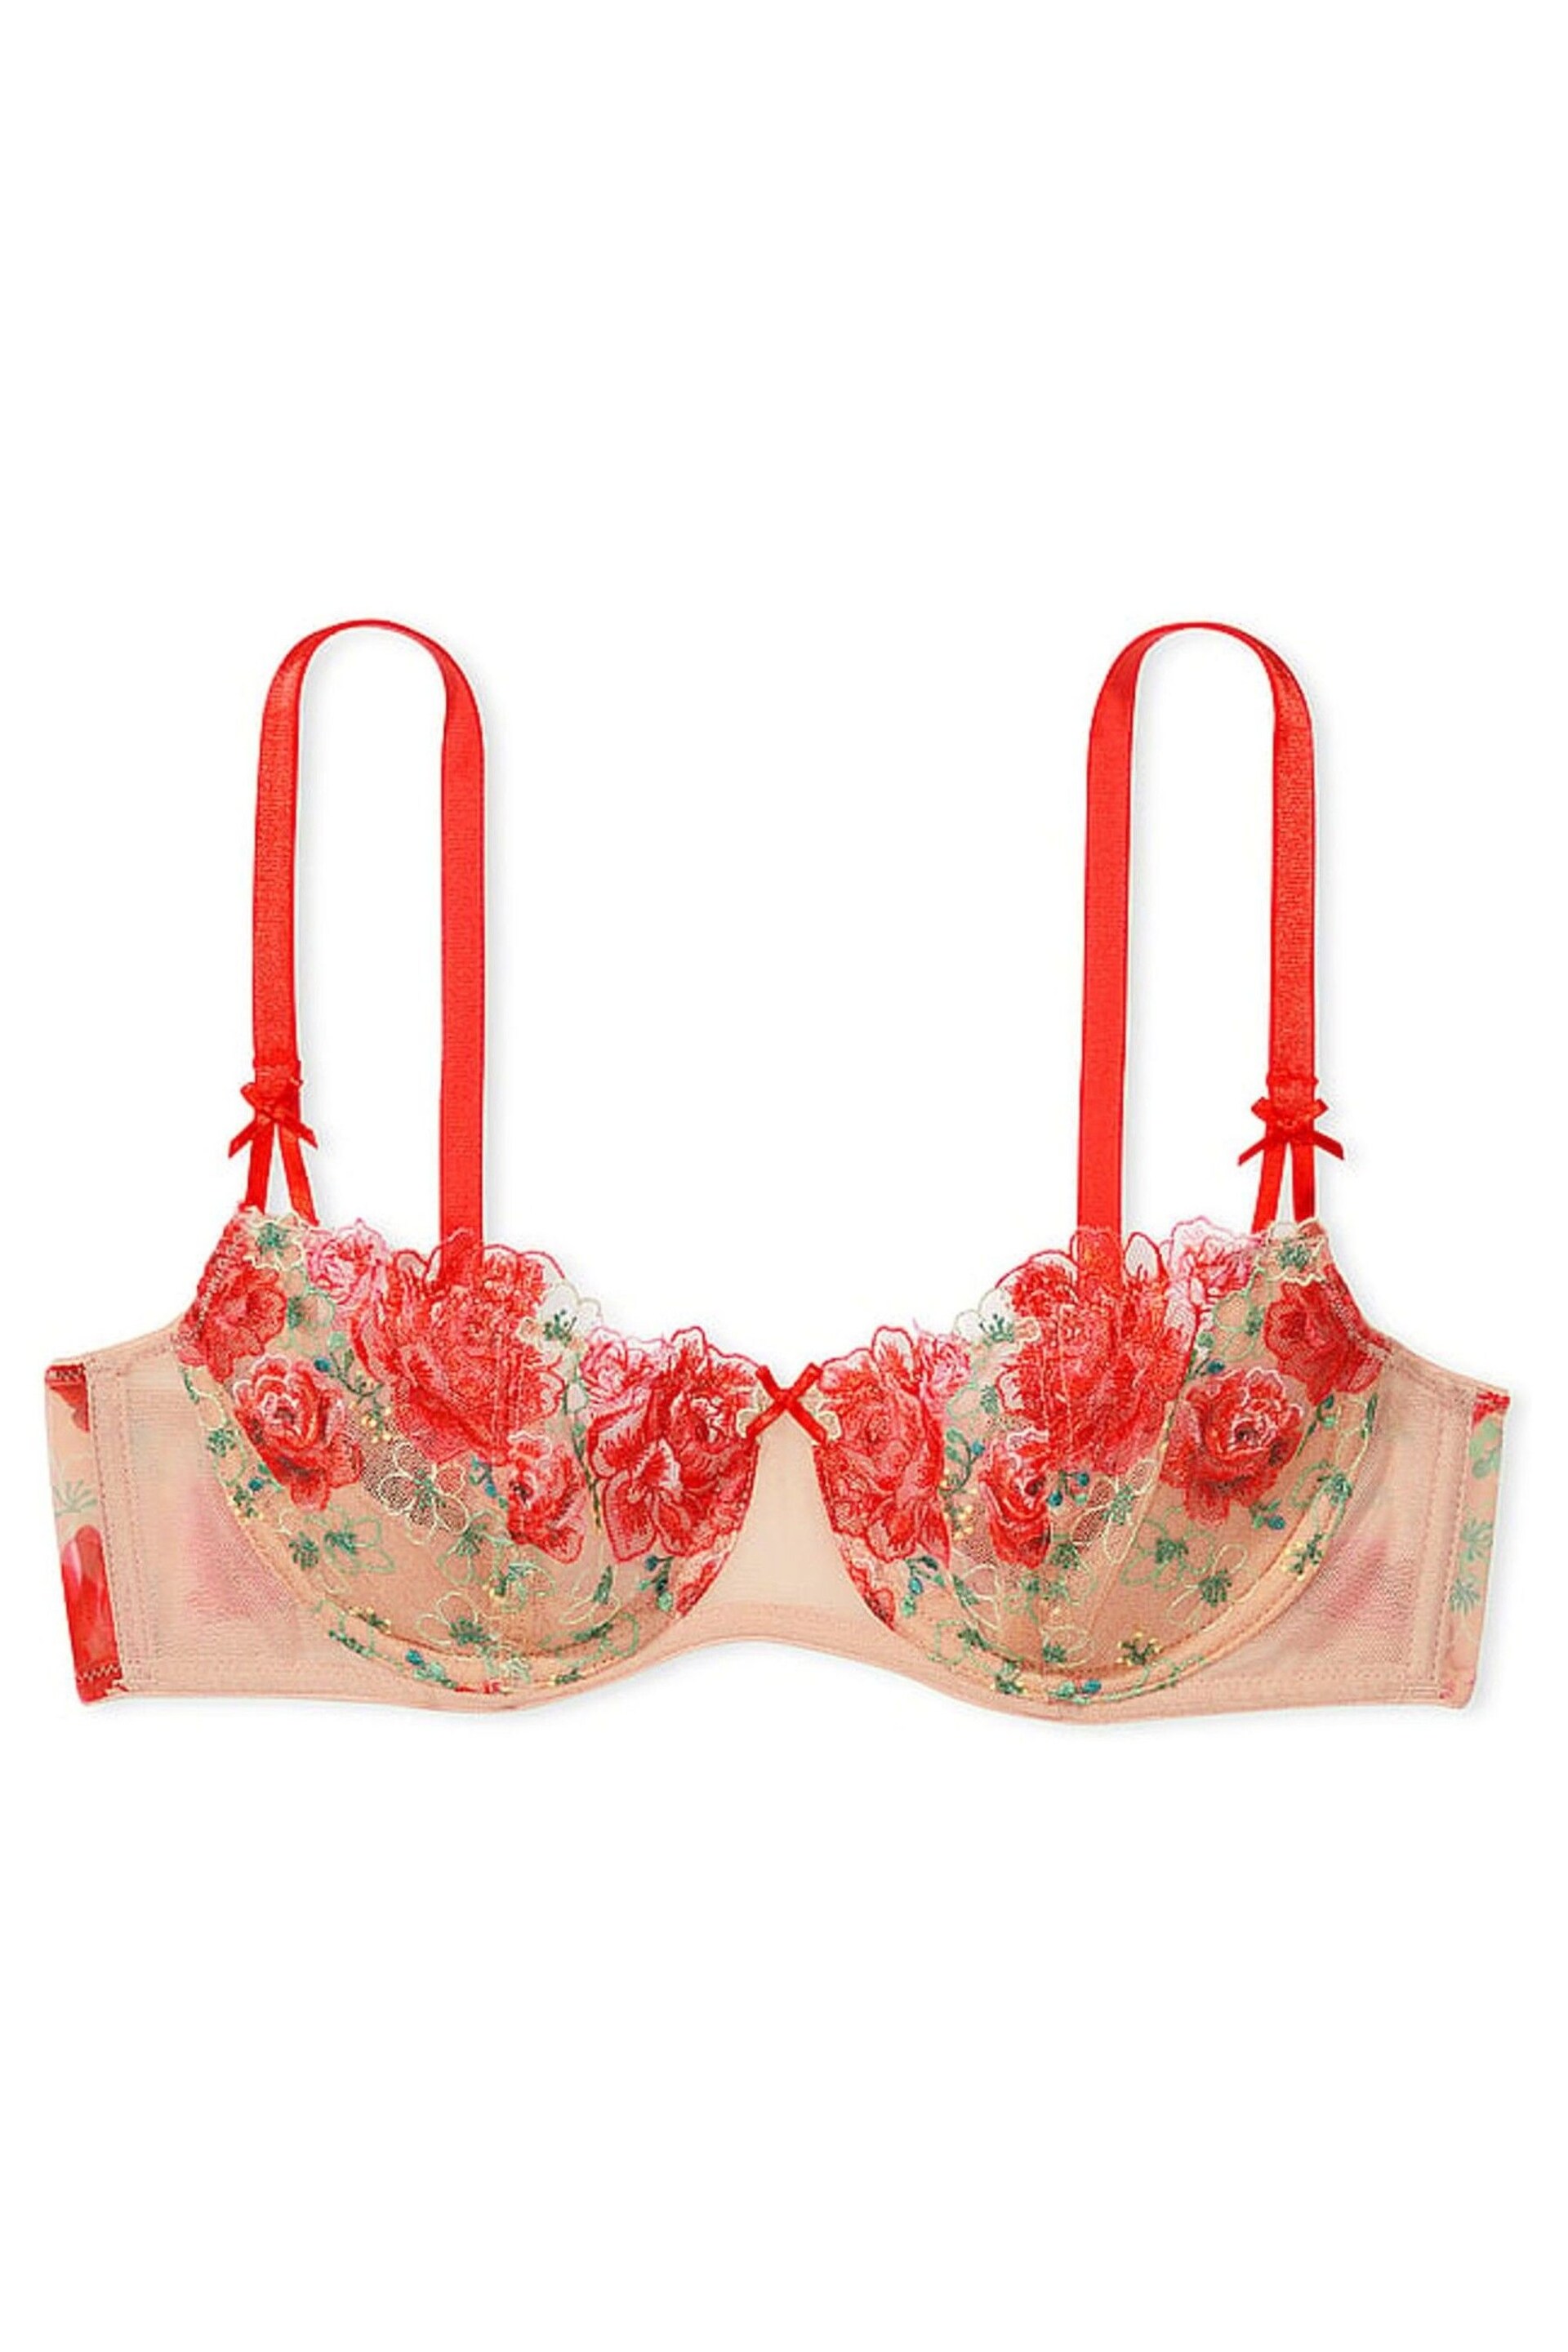 Victoria's Secret Tomato Red Embroidered Illuminating Blooms Lightly Lined Balcony Bra - Image 3 of 4